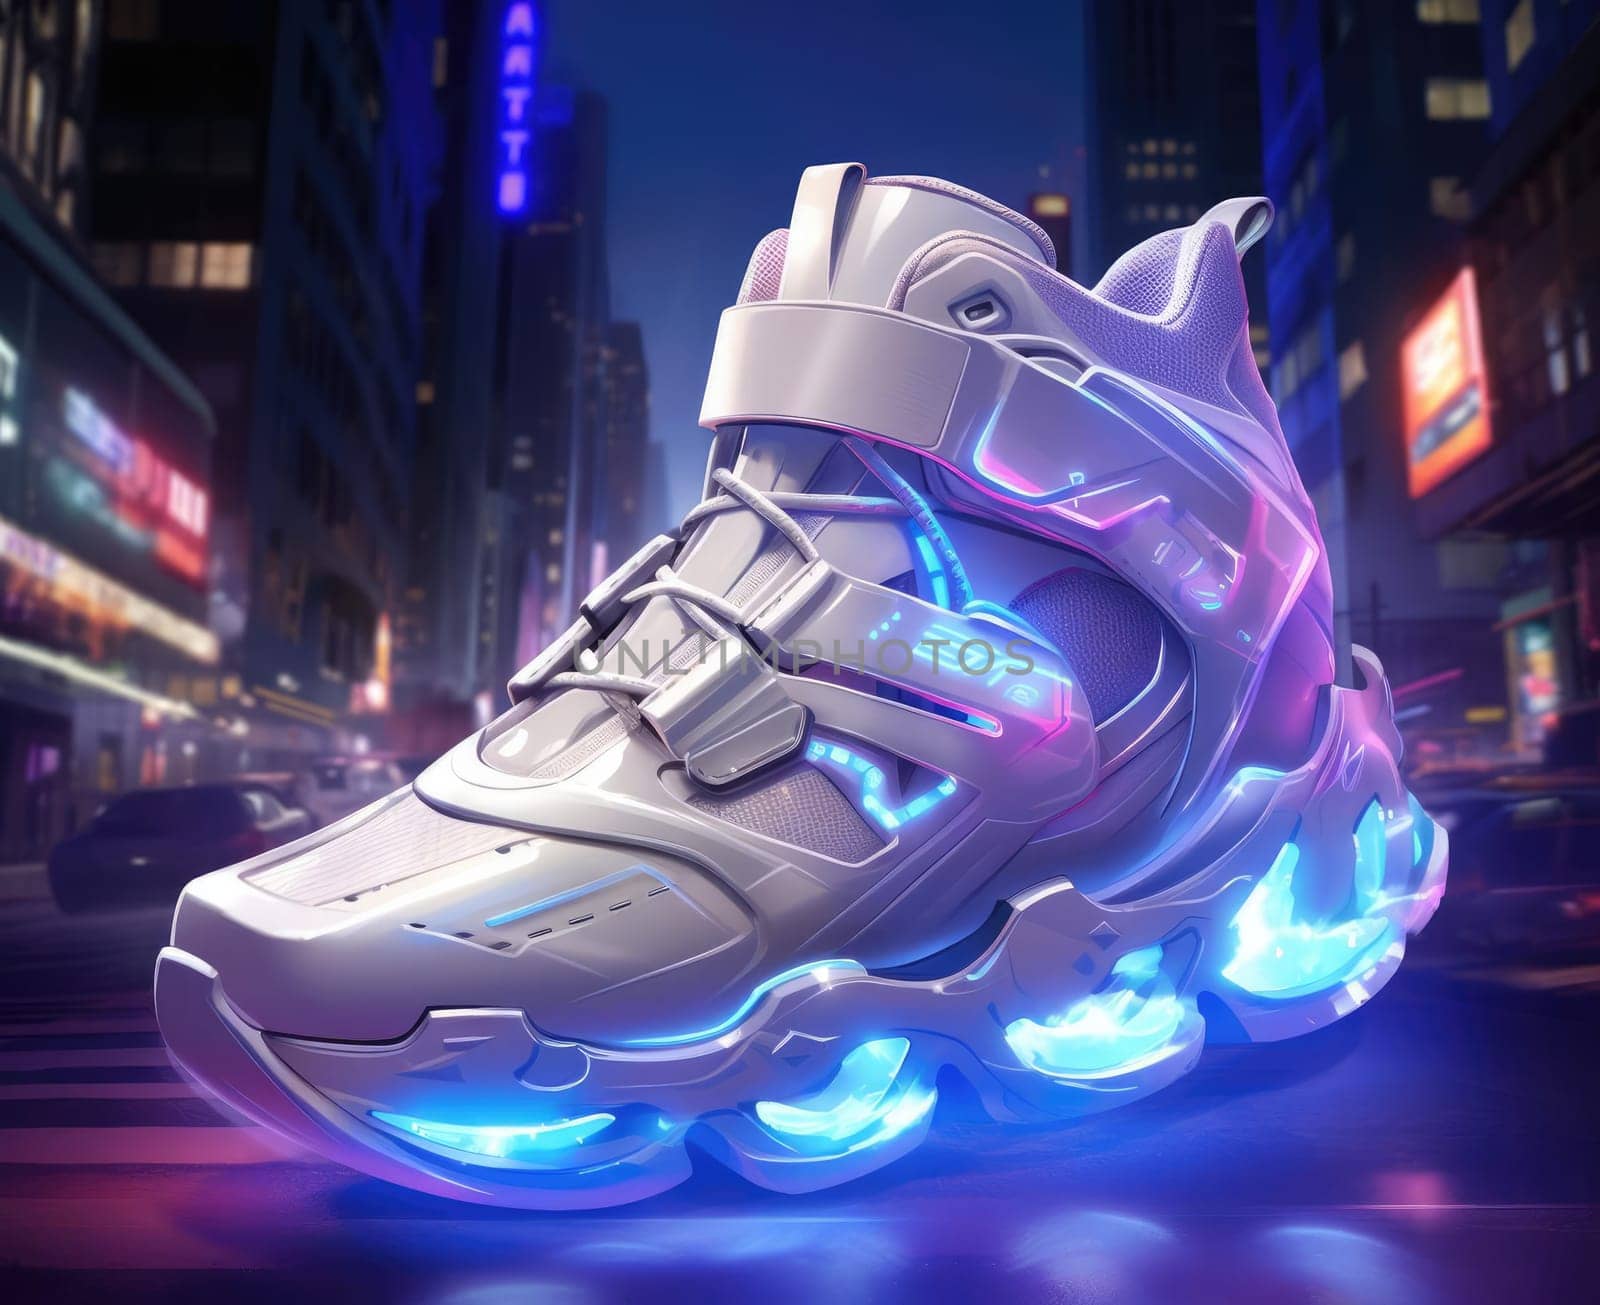 Sneakers with luminous elements in the style of cyberpunk